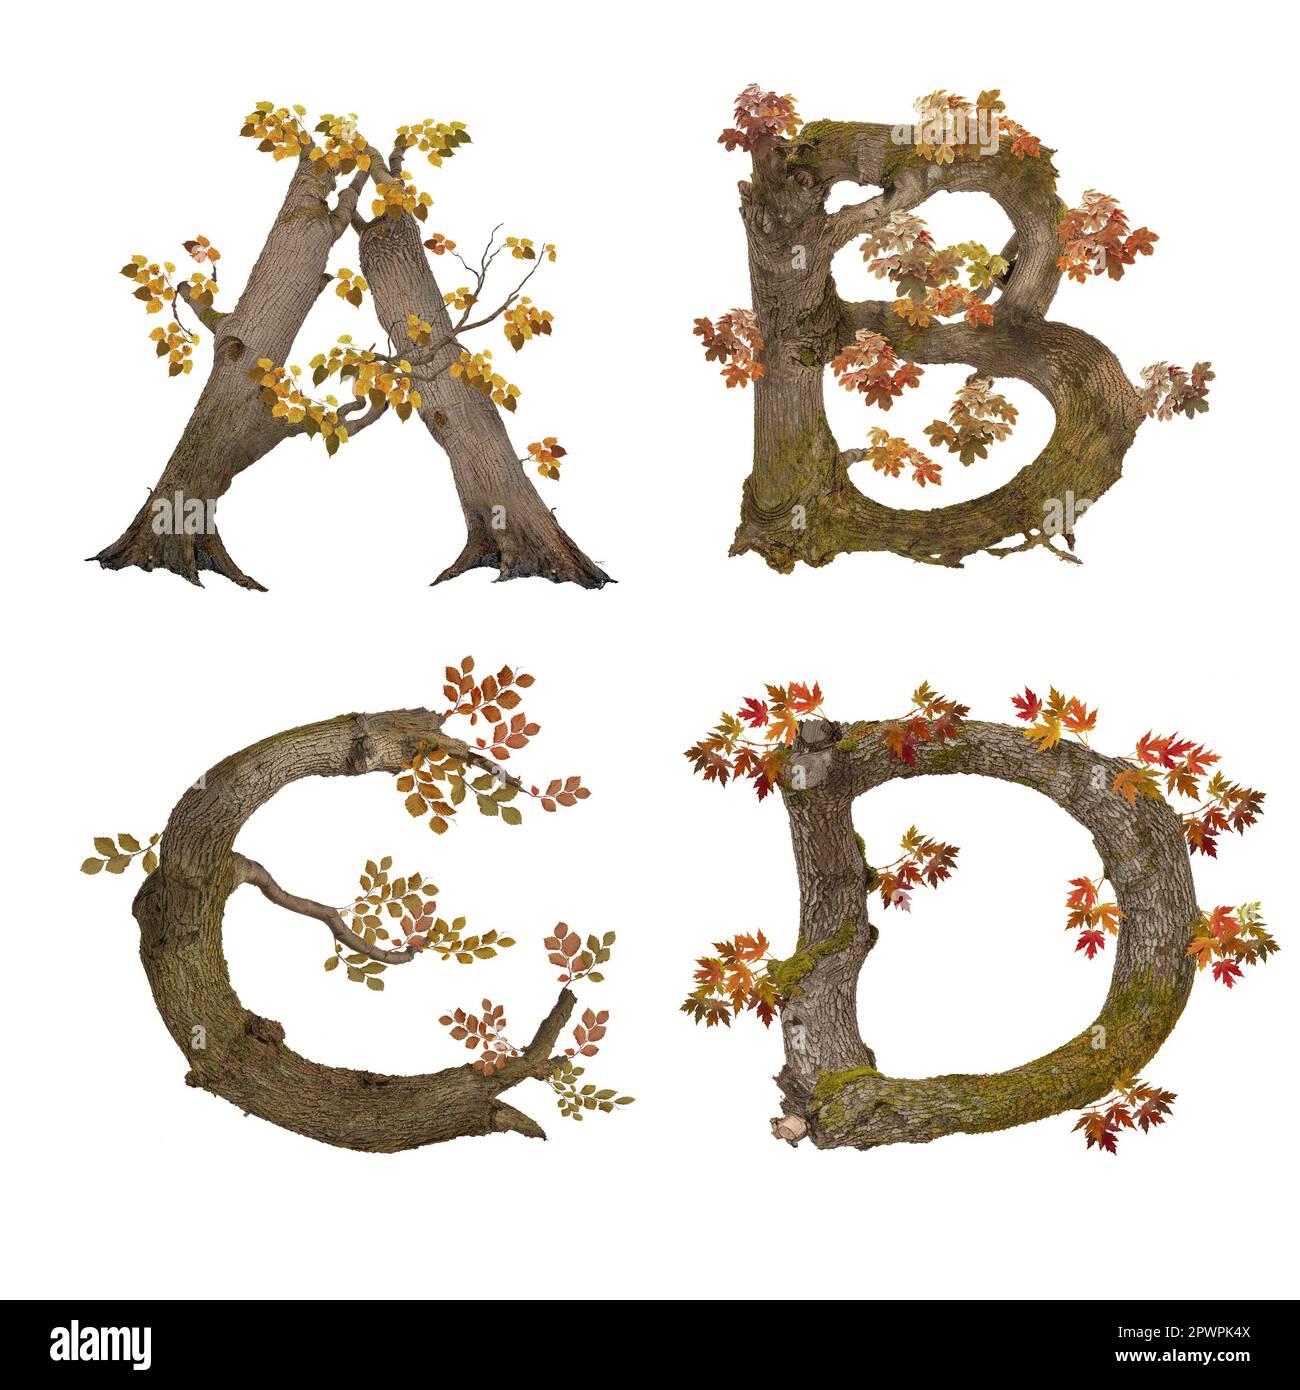 3D illustration of old autumn tree alphabet - letters A-D Stock Photo